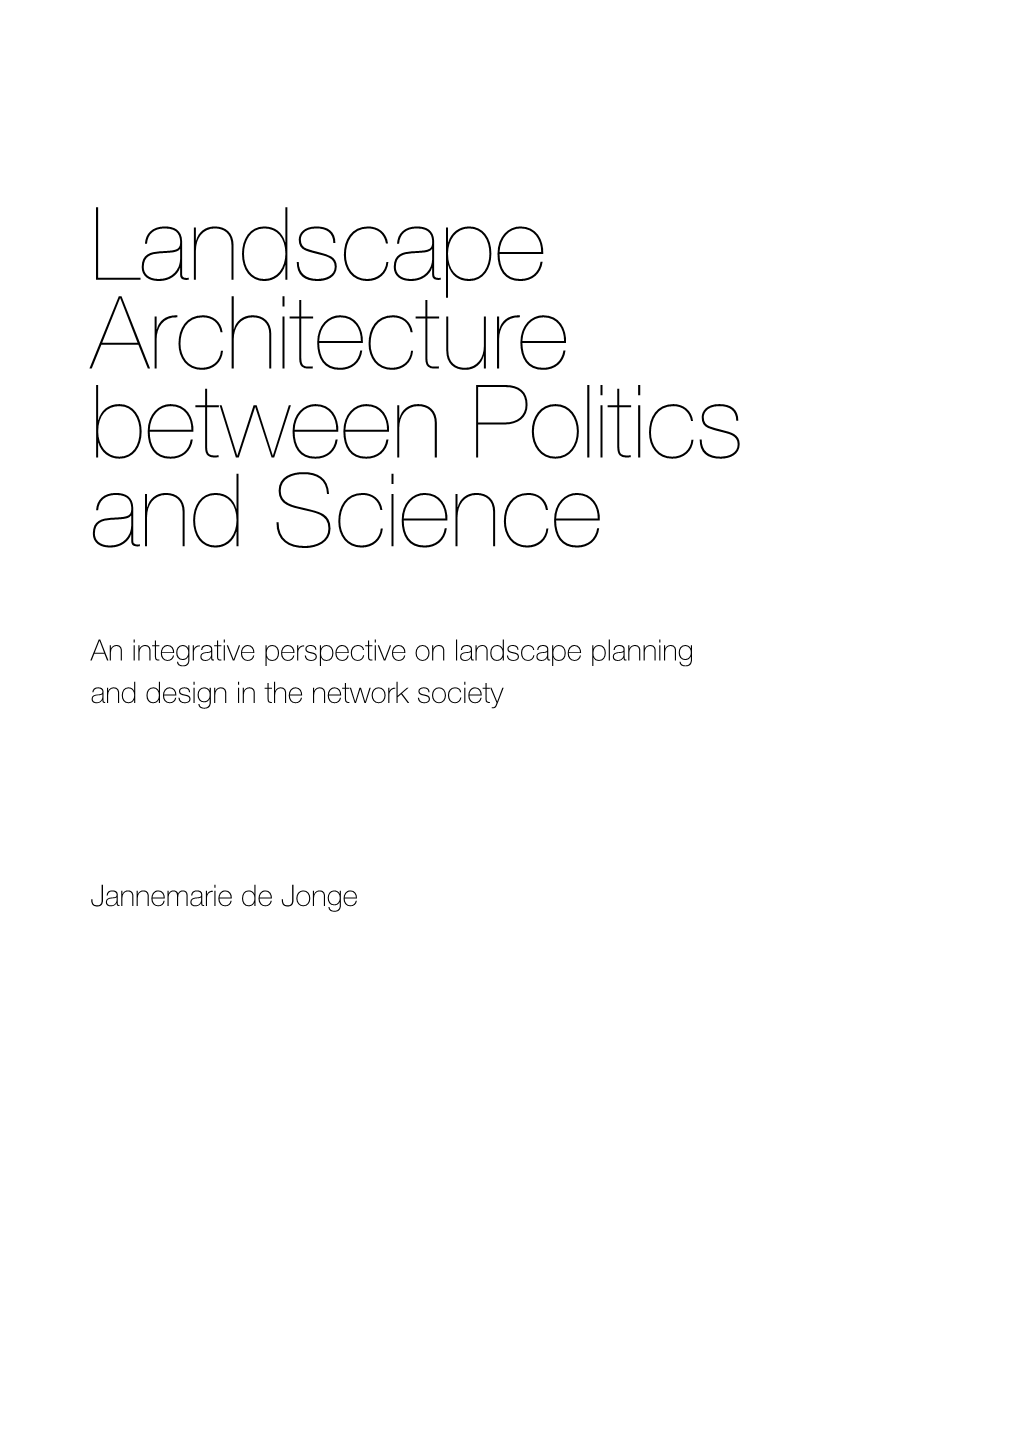 Landscape Architecture Between Politics and Science